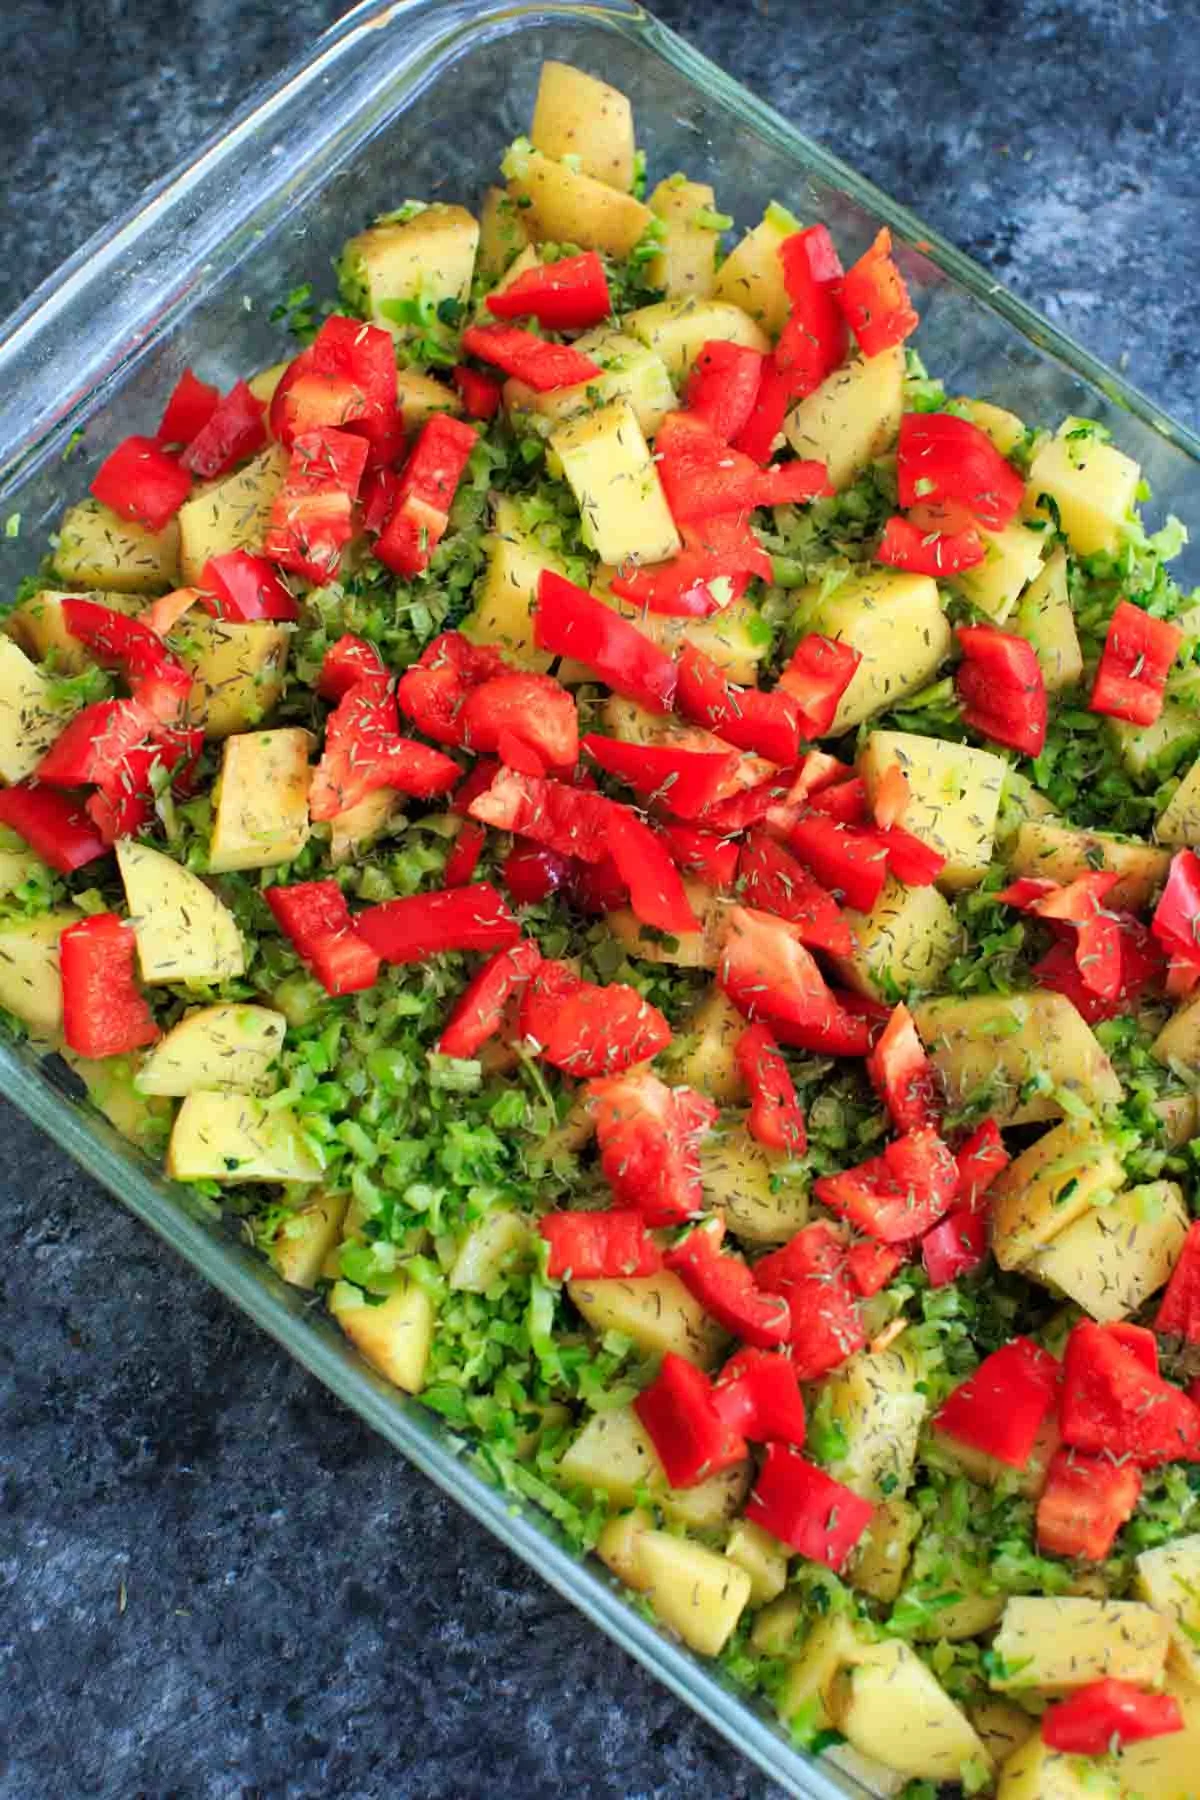 Potatoes, broccoli, bell pepper and spices in a casserole pan